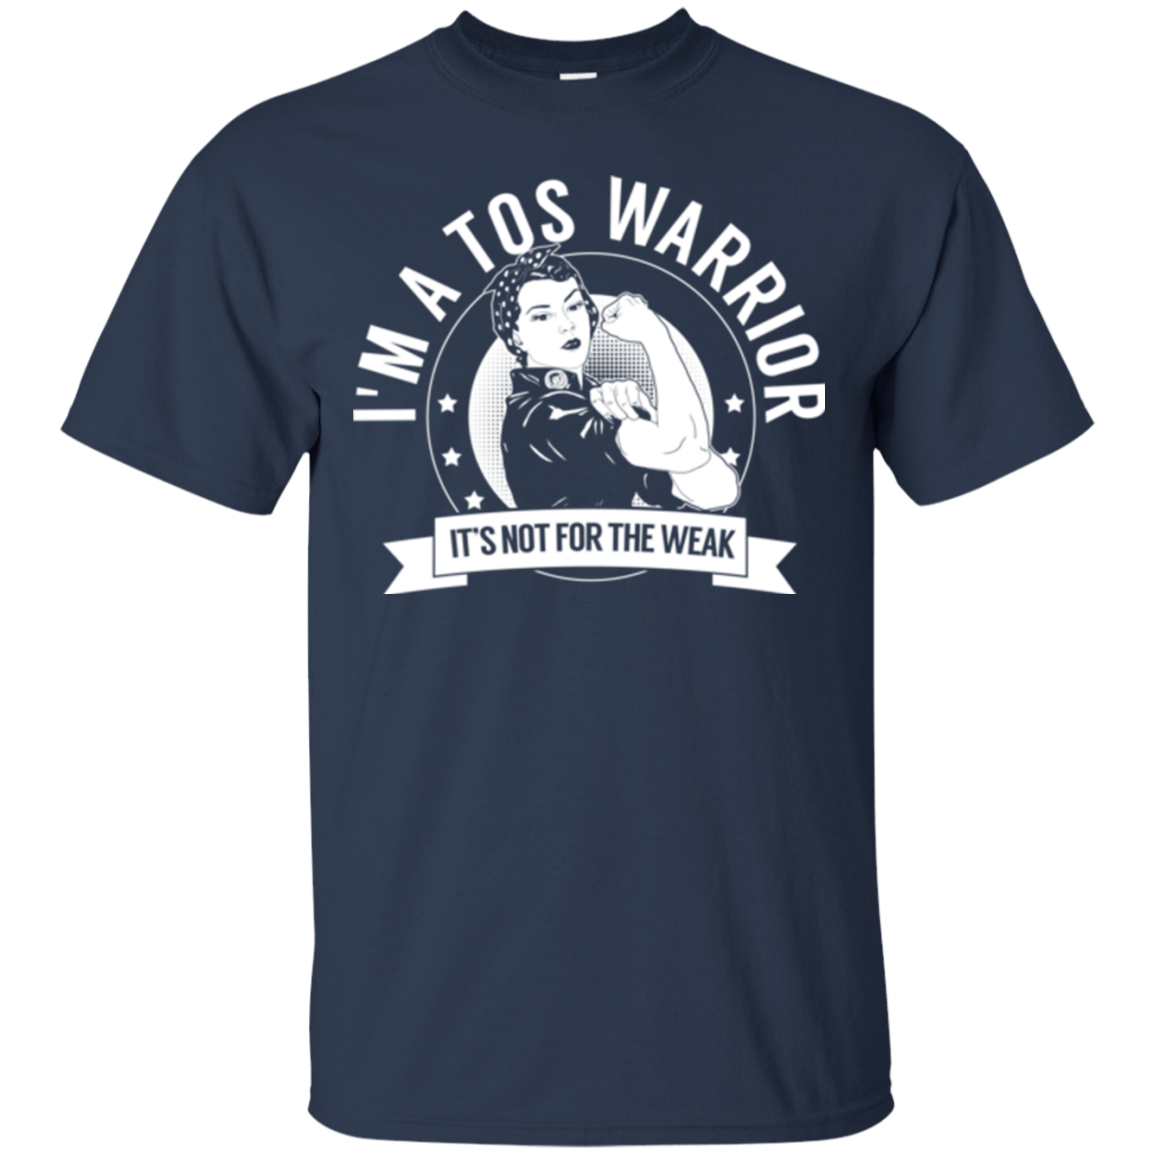 Thoracic Outlet Syndrome - TOS Warrior Not For The Weak Cotton T-Shirt - The Unchargeables